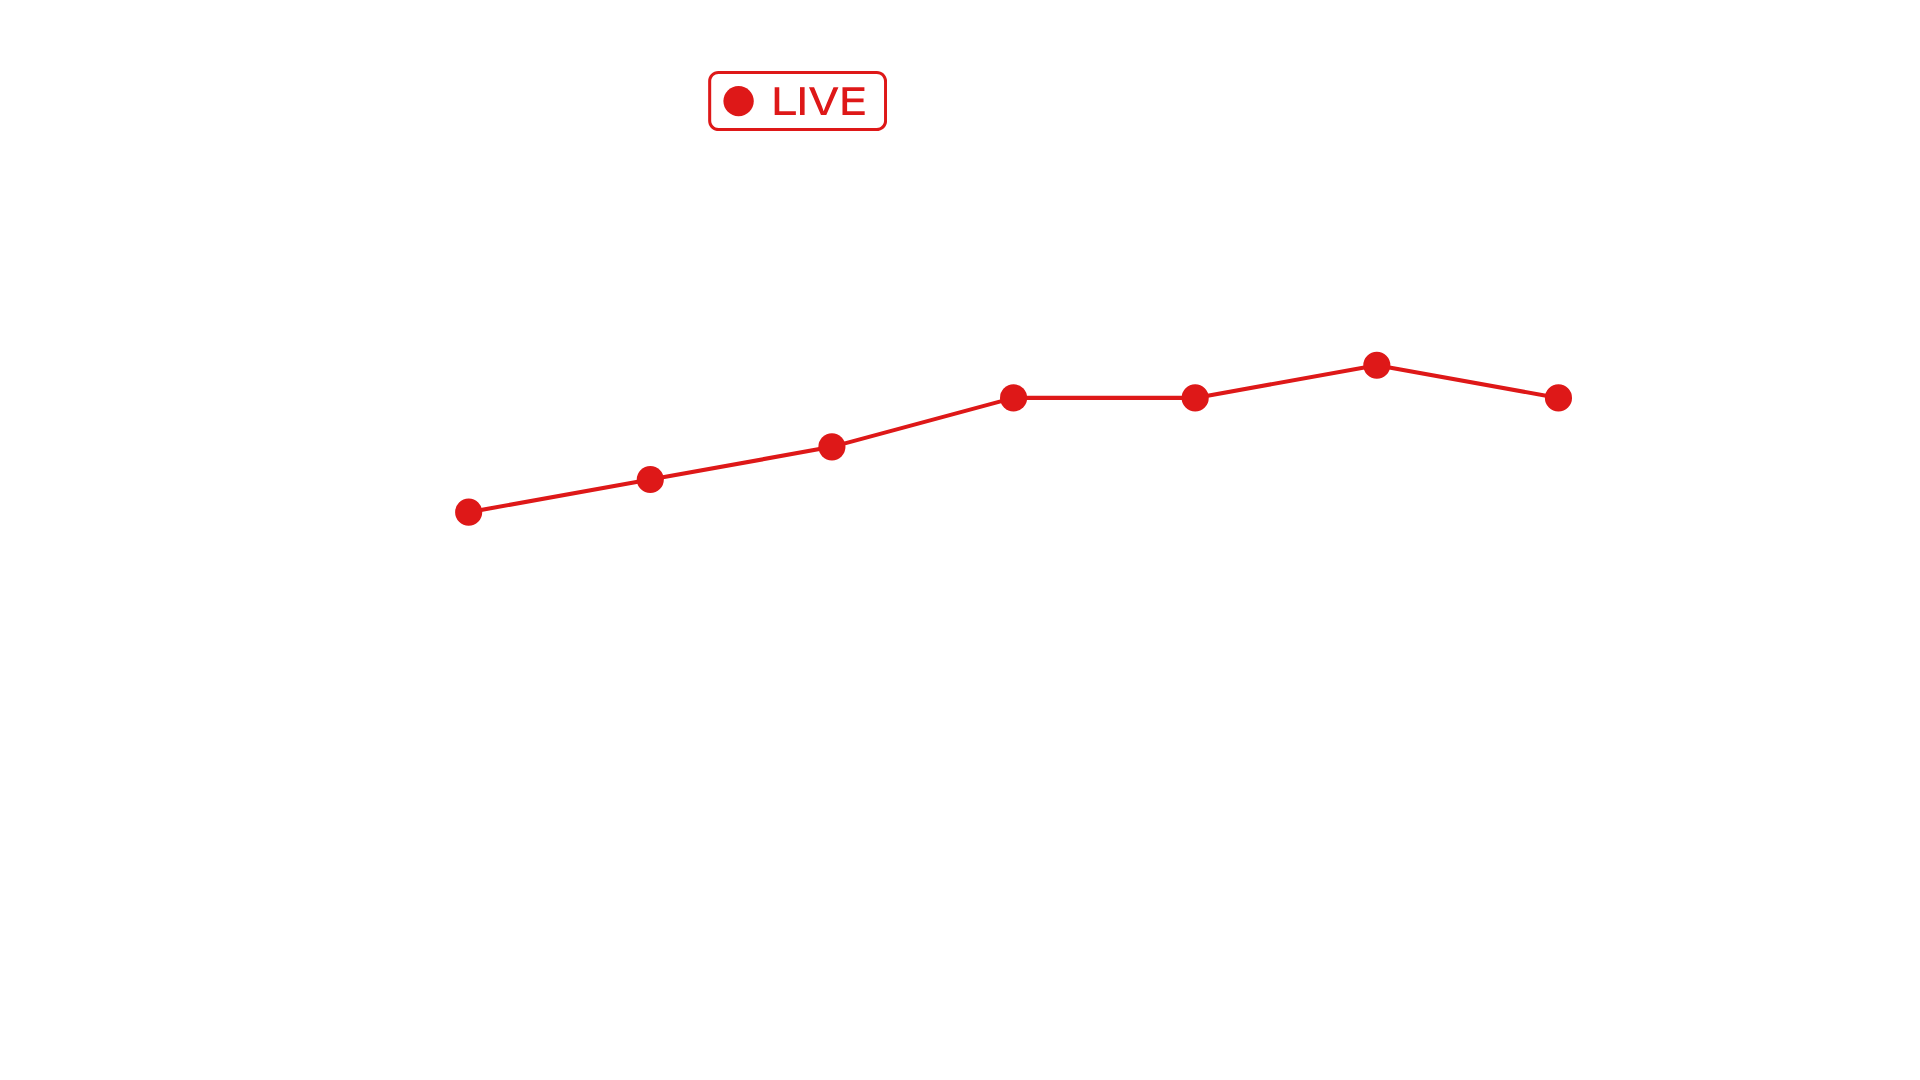 Flooring Installation Labour Cost 2024 - July